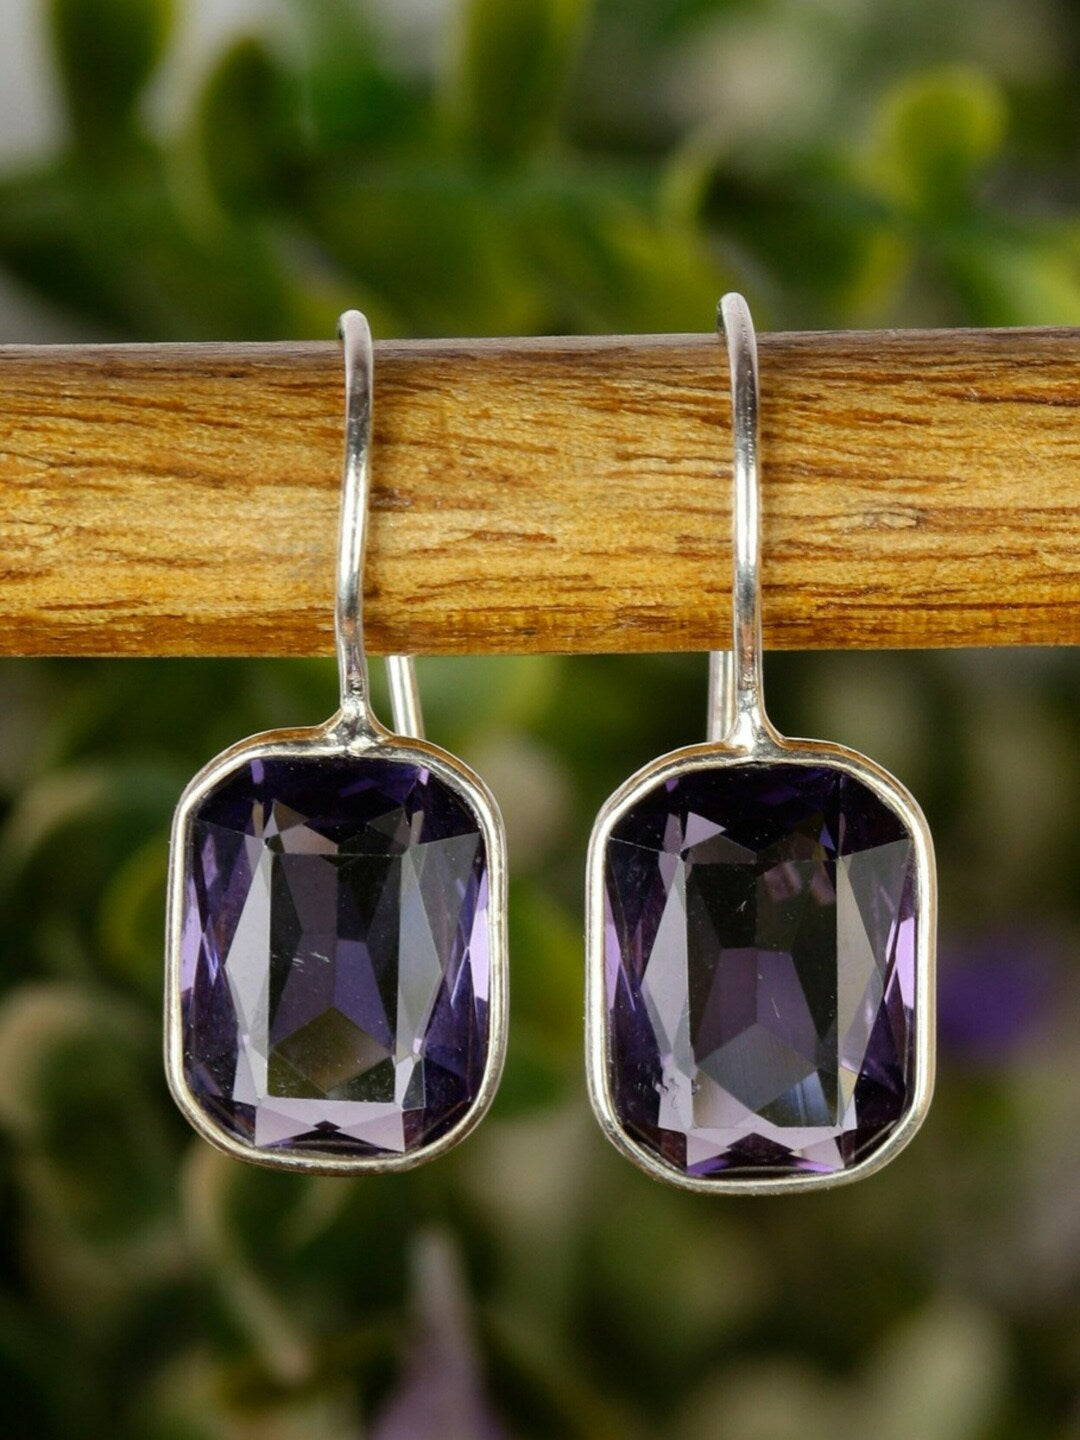 EL REGALO Purple & Silver-Toned Stone Studded Square Drop Earrings - for Women and Girls
Style ID: 17025040